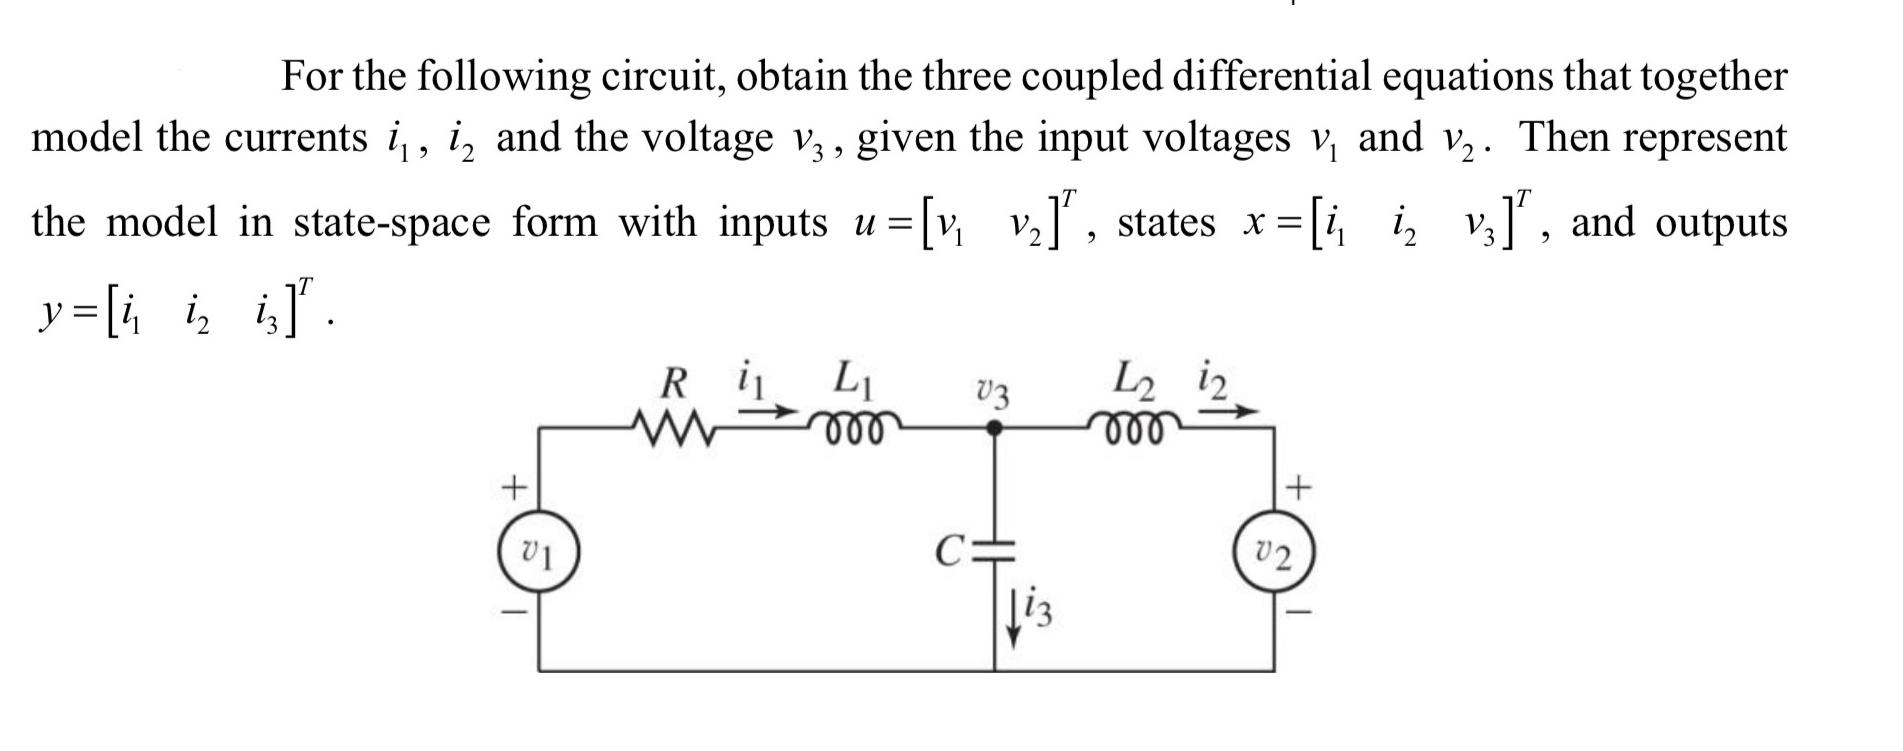 For the following circuit, obtain the three coupled differential equations that together model the currents